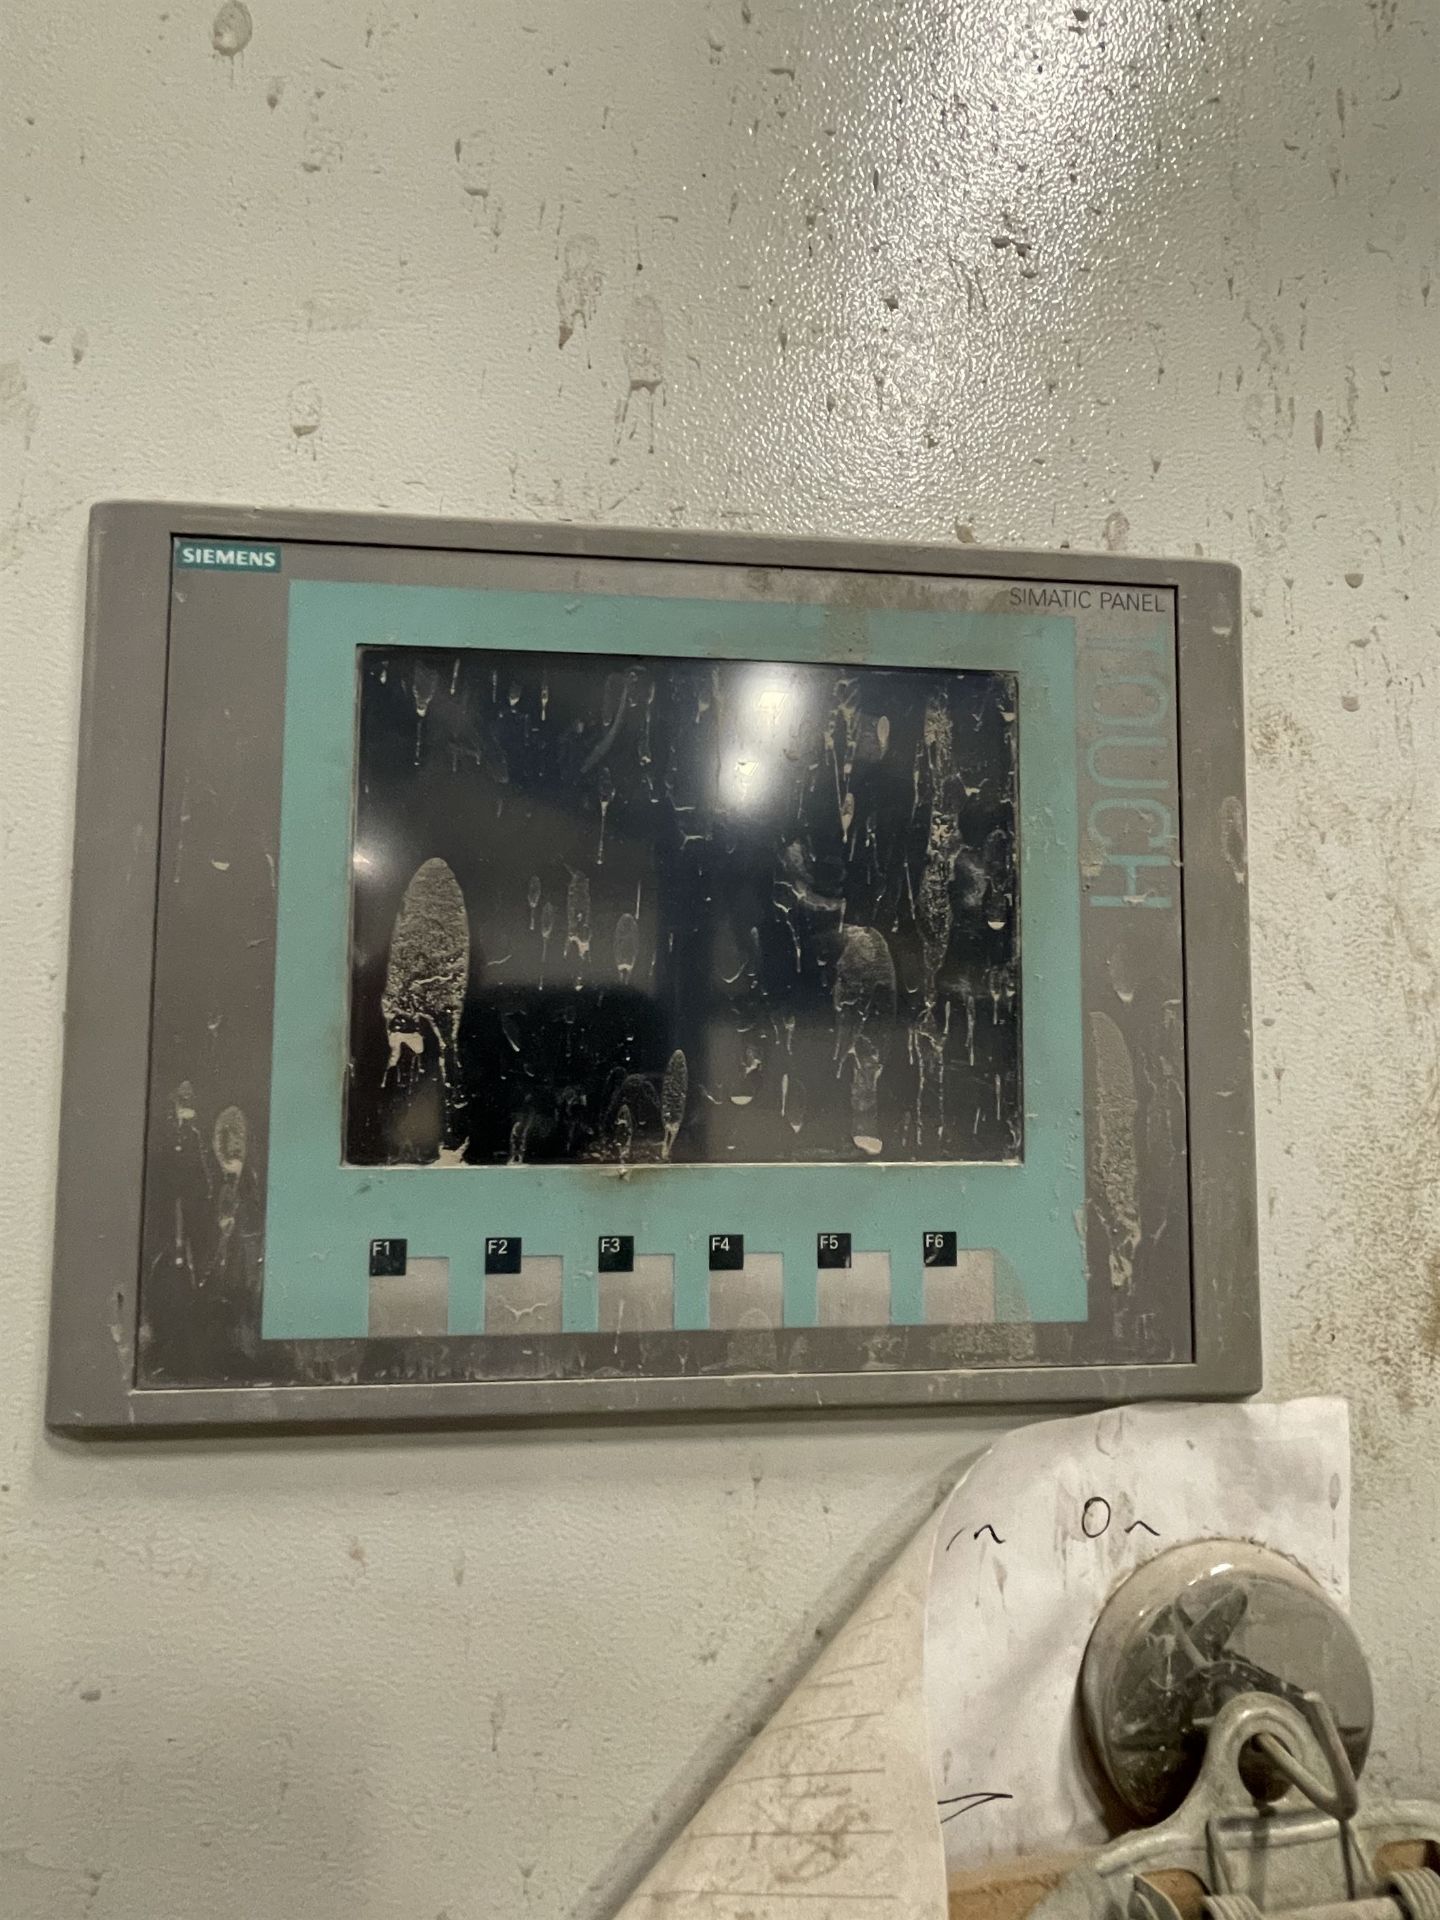 Industrial Control Panel, w/ Siemens Simatic Panel Touch Screen PLC, 85 A, 480/270 V, 3 Phase + - Image 5 of 6